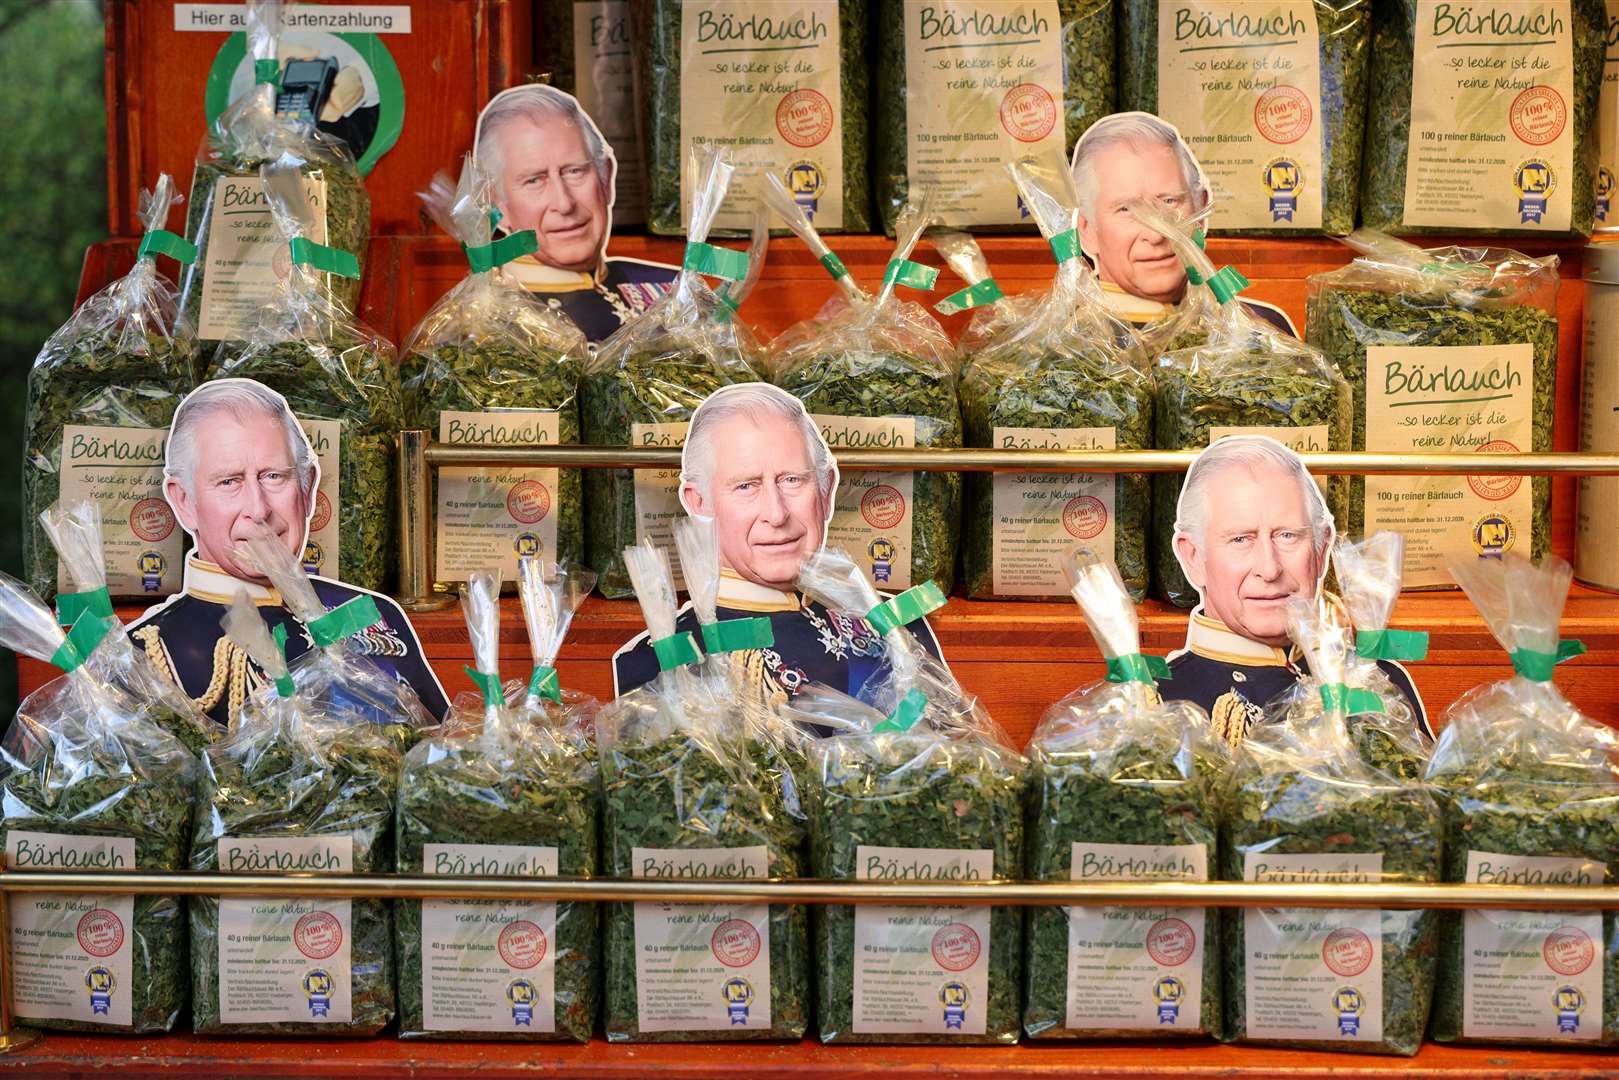 Cardboard cut-outs of the King are seen among packages of wild garlic ahead of his visit with the Queen Consort to the Wittenbergplatz market (Adrian Dennis/PA)